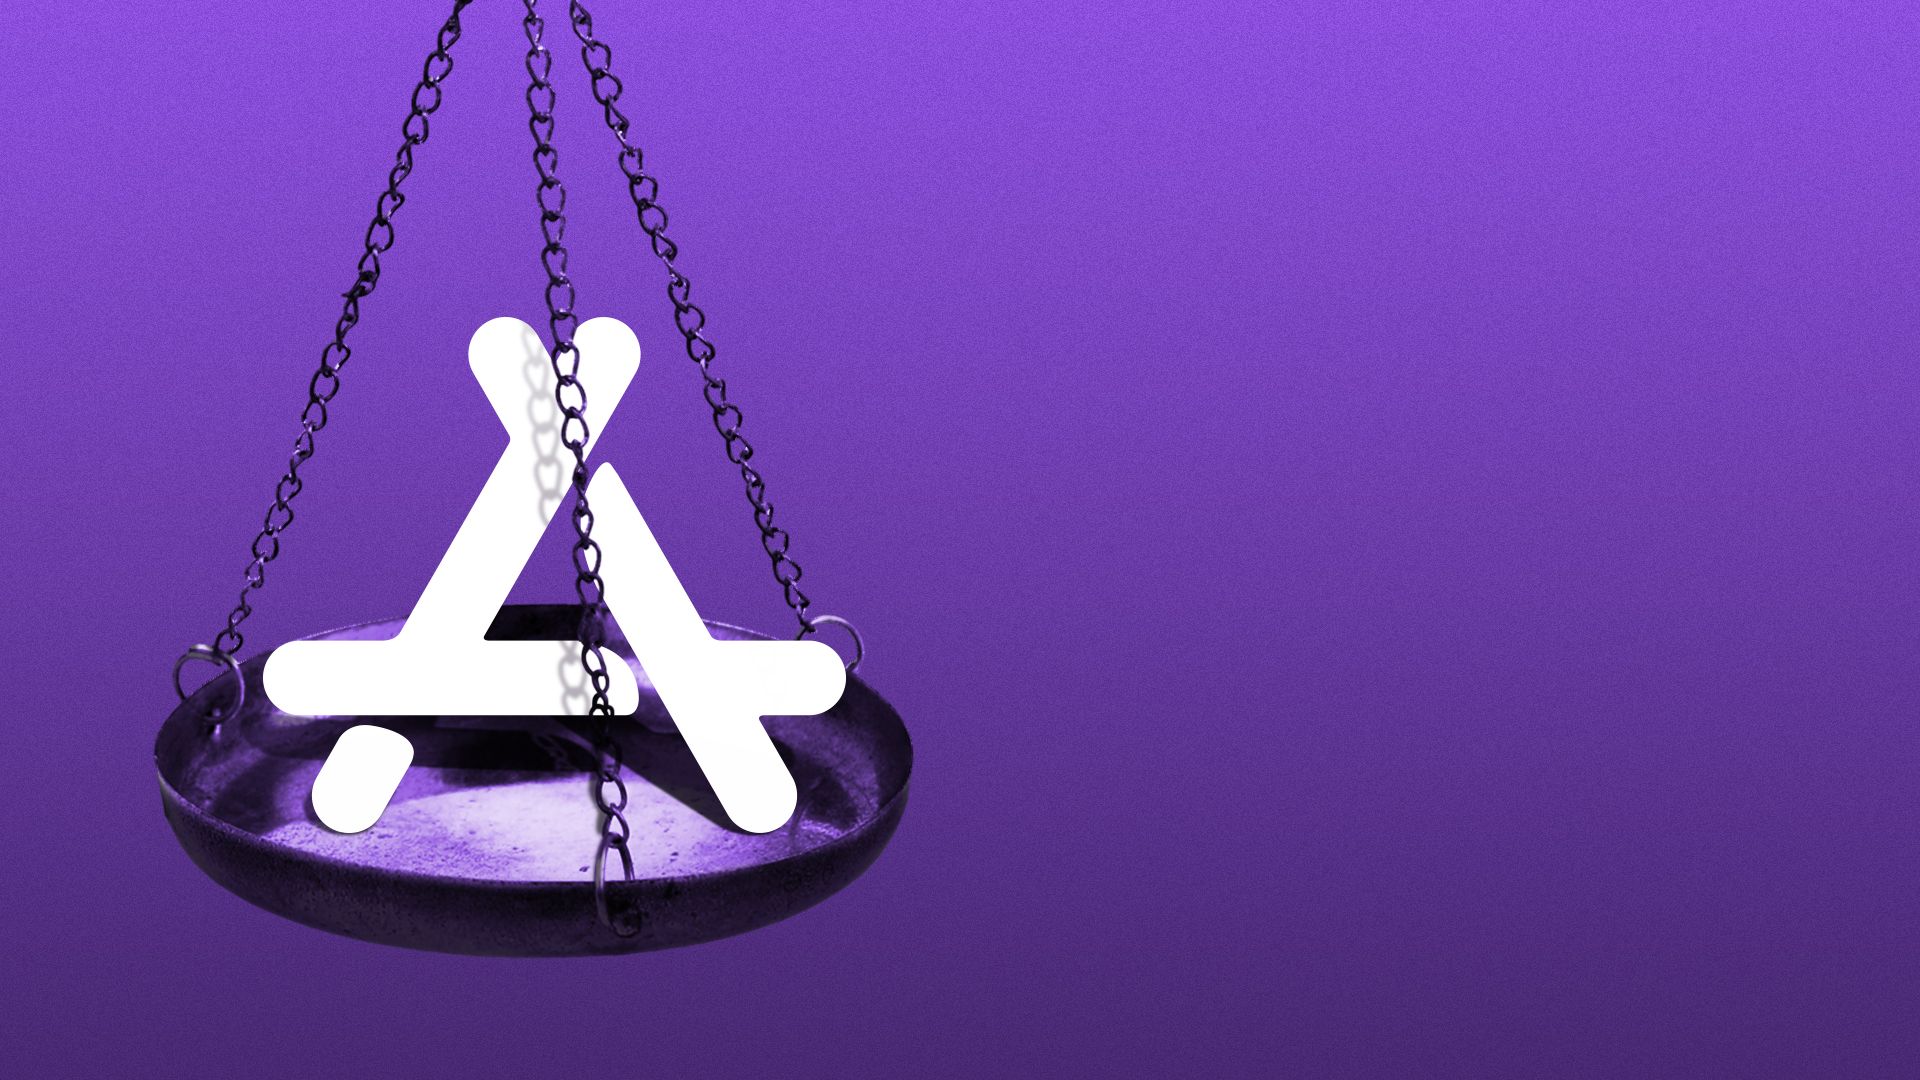 Illustration of app store icon on the scales of justice